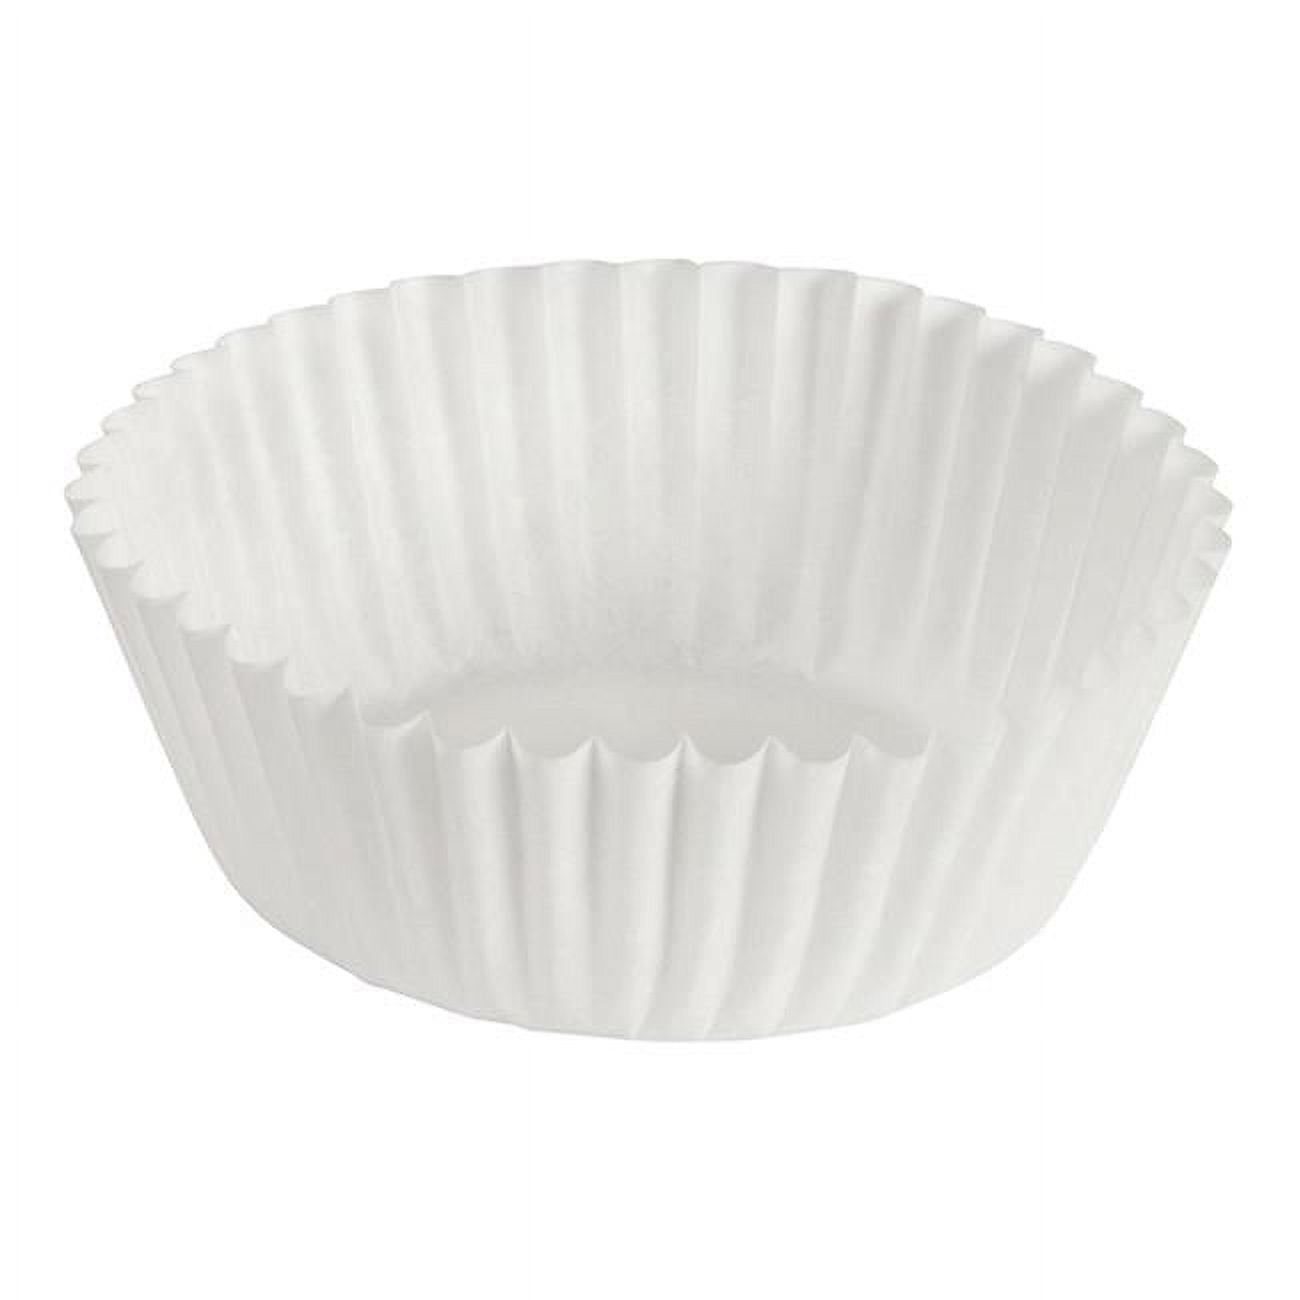 Reynolds Fc225x550 5.5 In. Paperboard Baking Cup, White - Case Of 10000